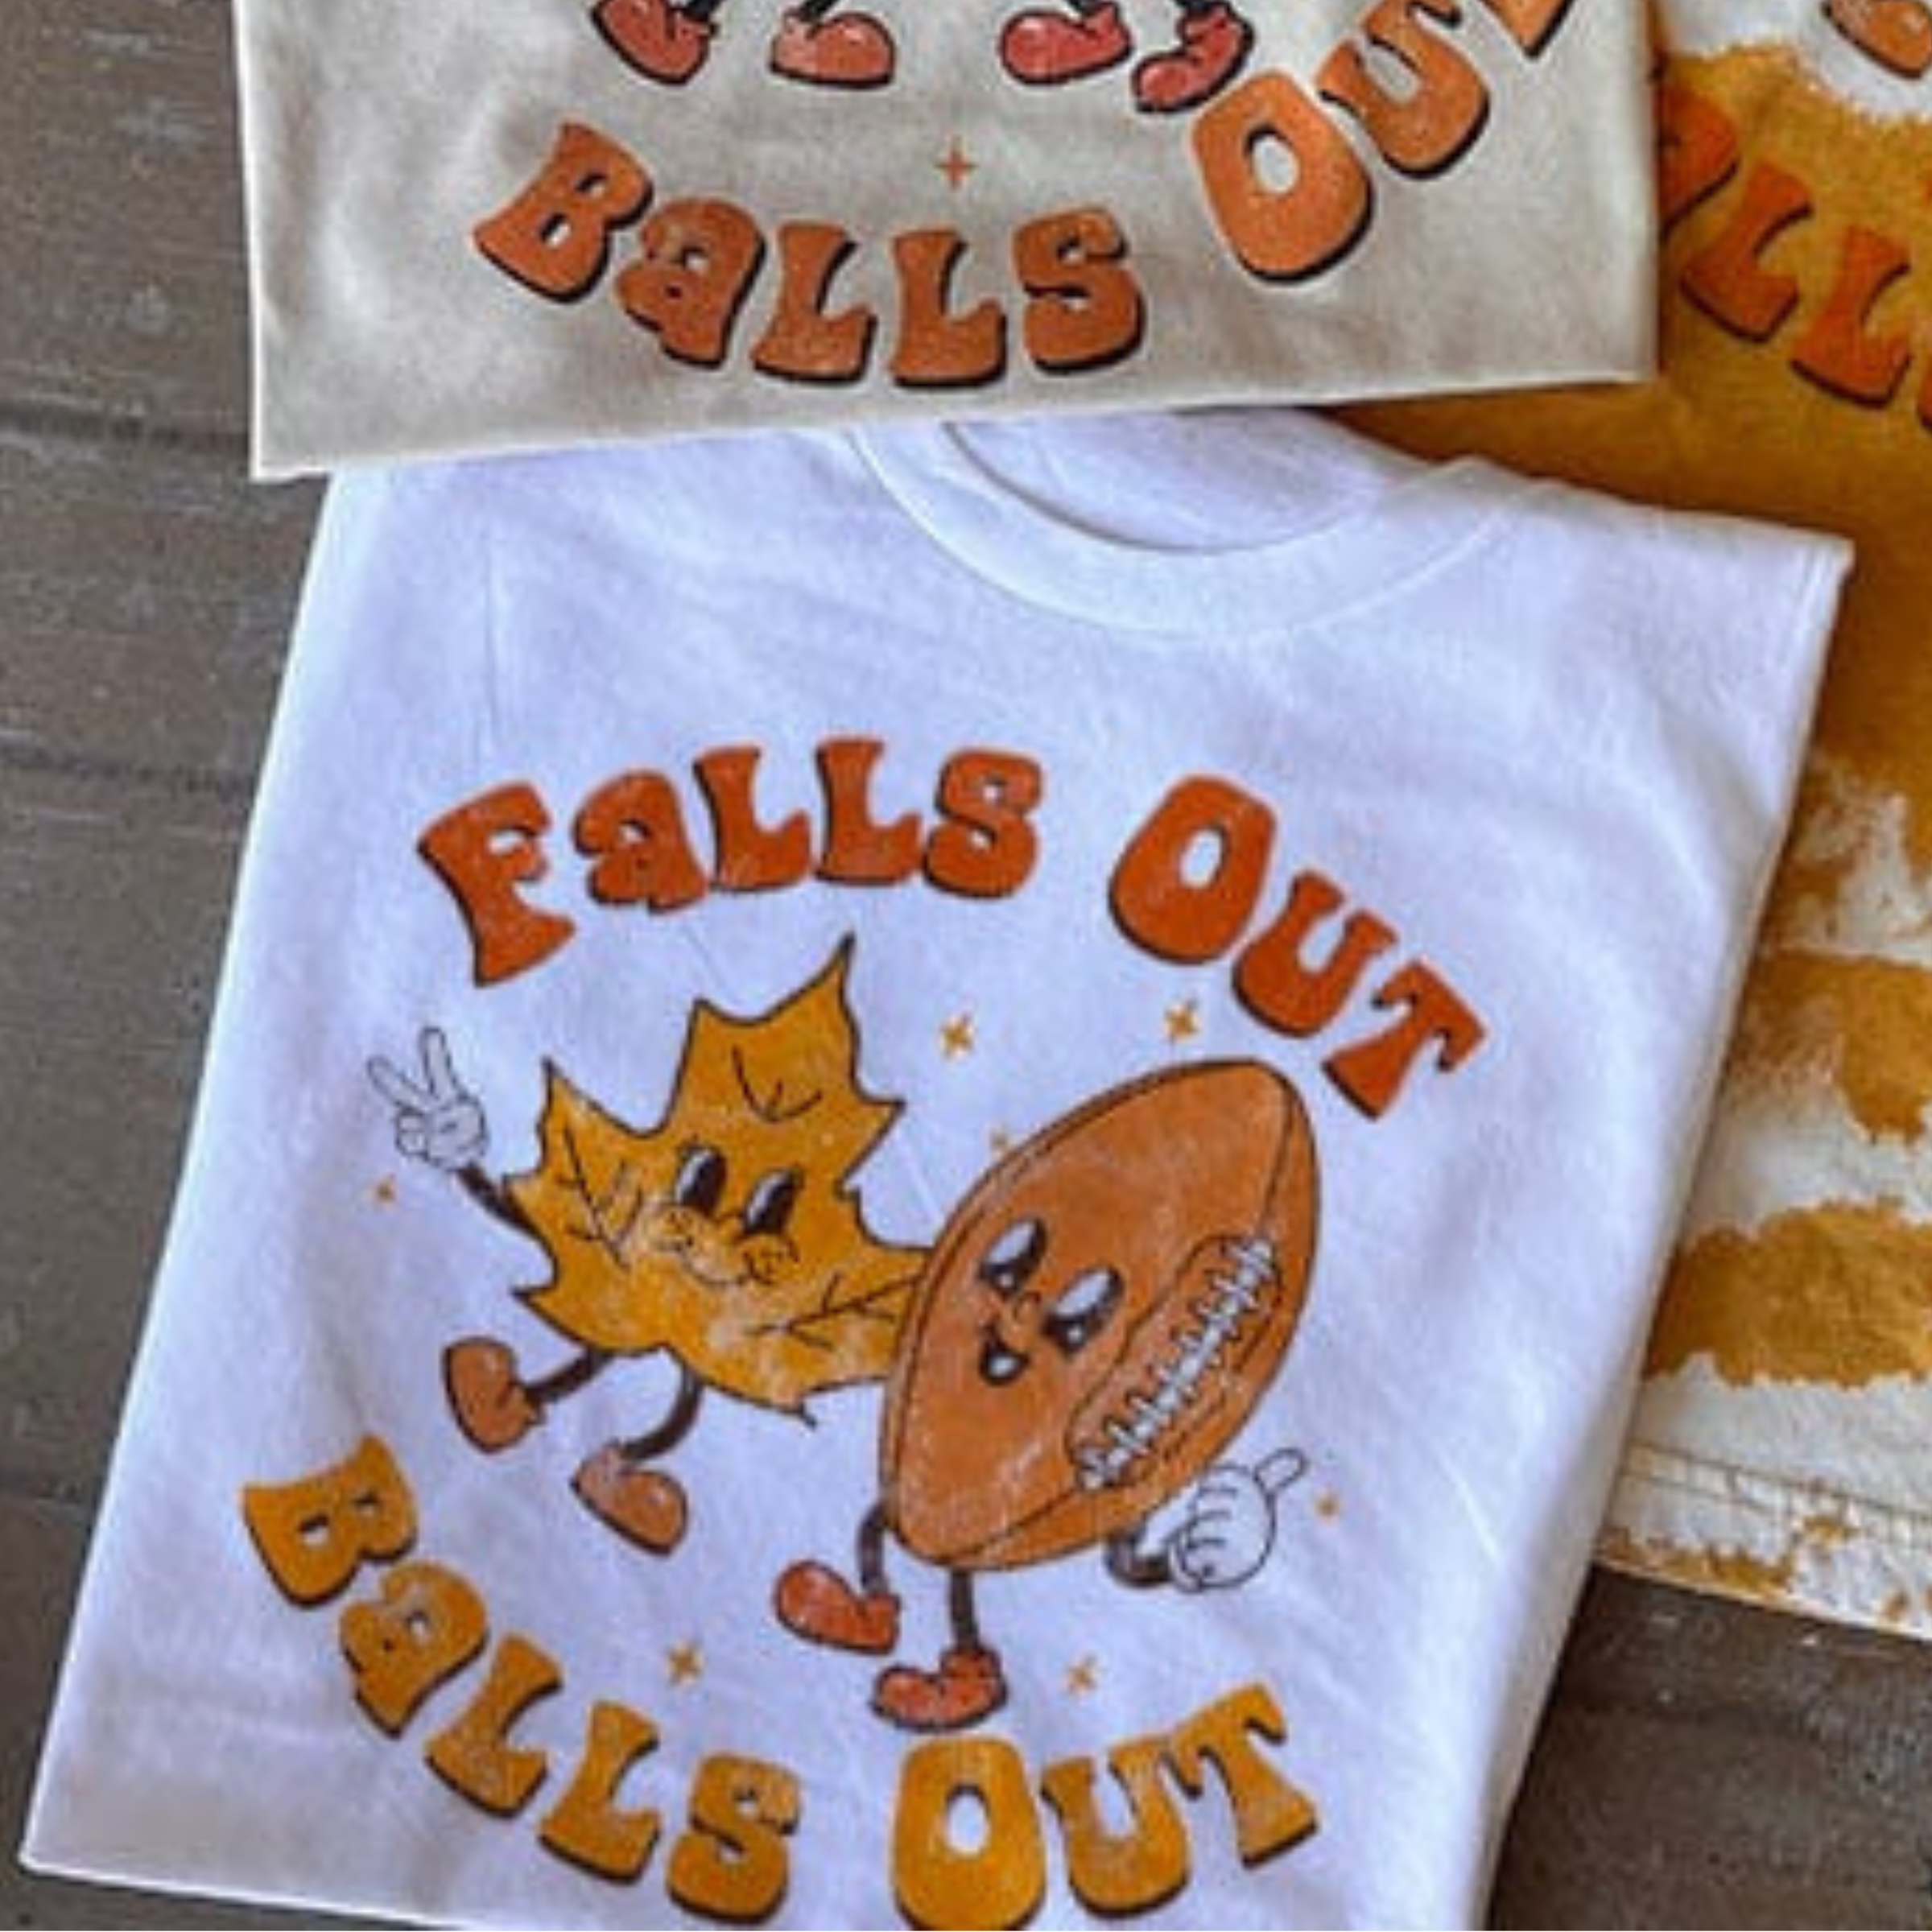 This Bella + Canvas white tee includes a crew neckline, short sleeves, and a cute hand drawn design of an orange leaf and football with the words "Fall Out" above them and "Balls Out" below them. The fonts are in rust orange and mustard yellow, perfect for Fall. This is shown as a folded flat lay in this photo.